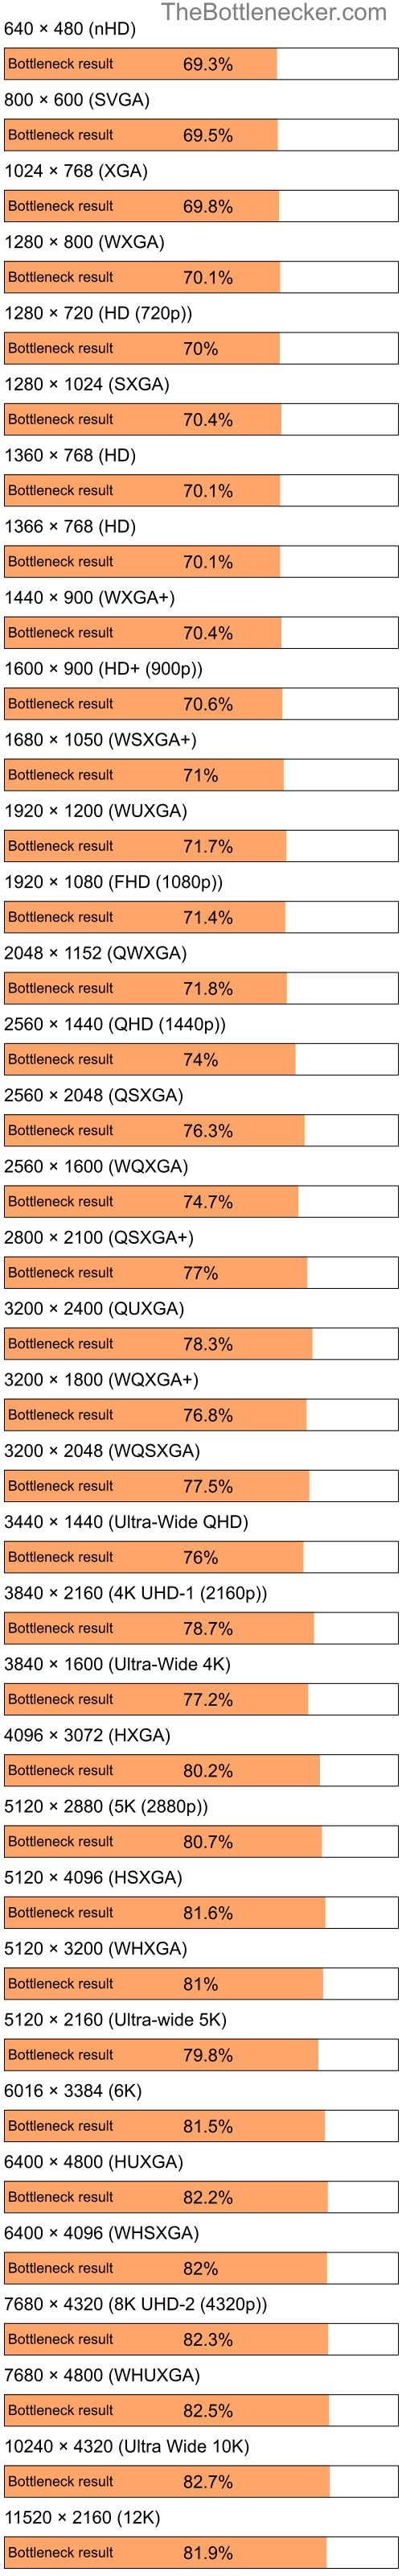 Bottleneck results by resolution for Intel Pentium 4 and NVIDIA Quadro NVS 110M in General Tasks